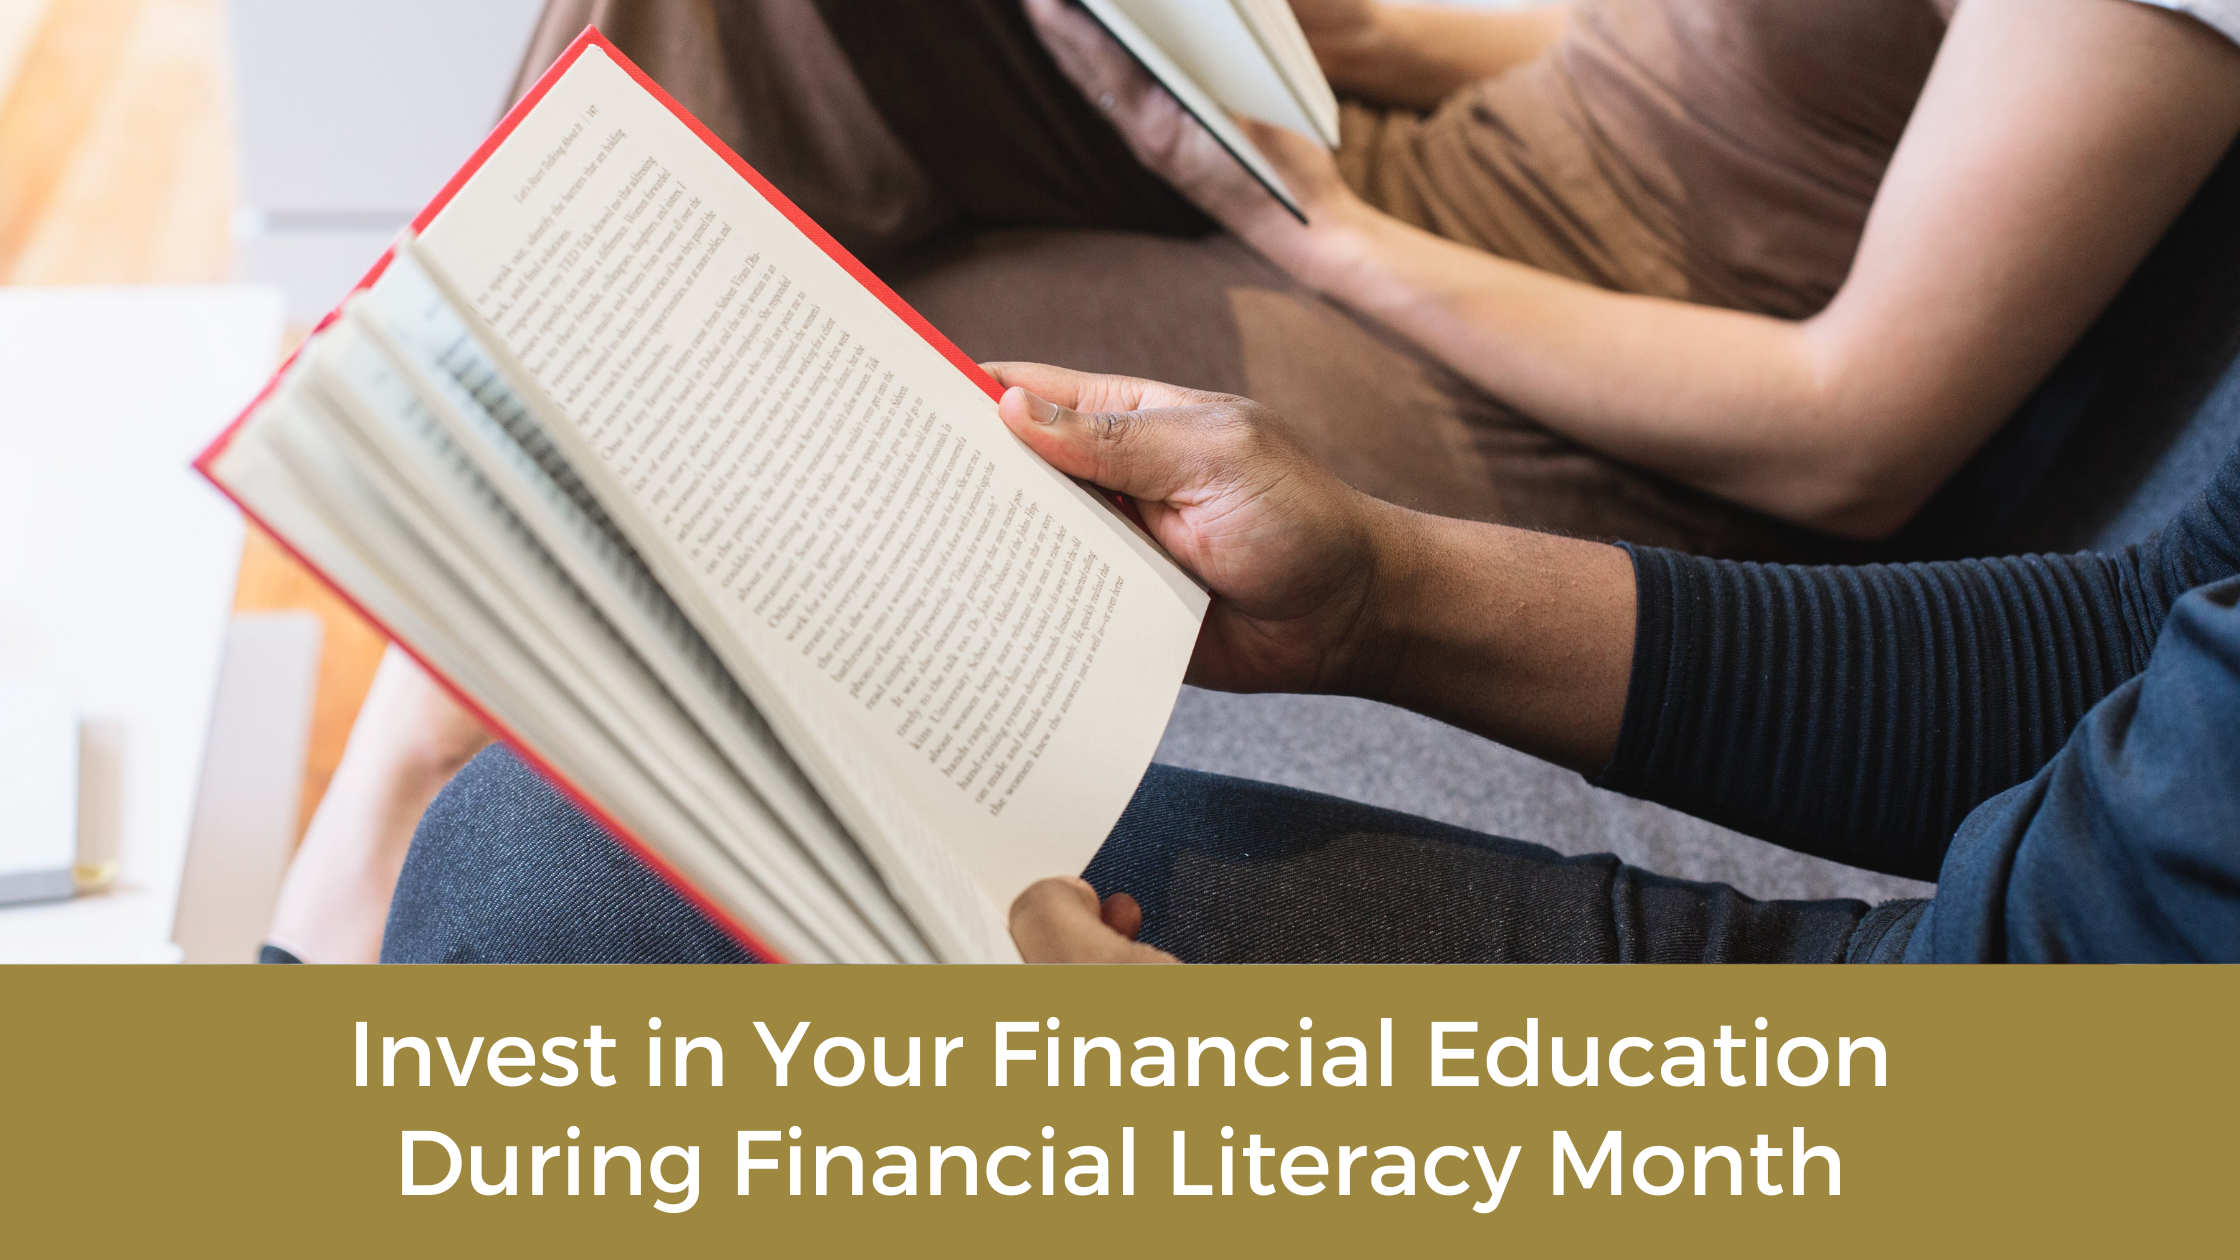 Featured image for “Invest in Your Financial Education During Financial Literacy Month”